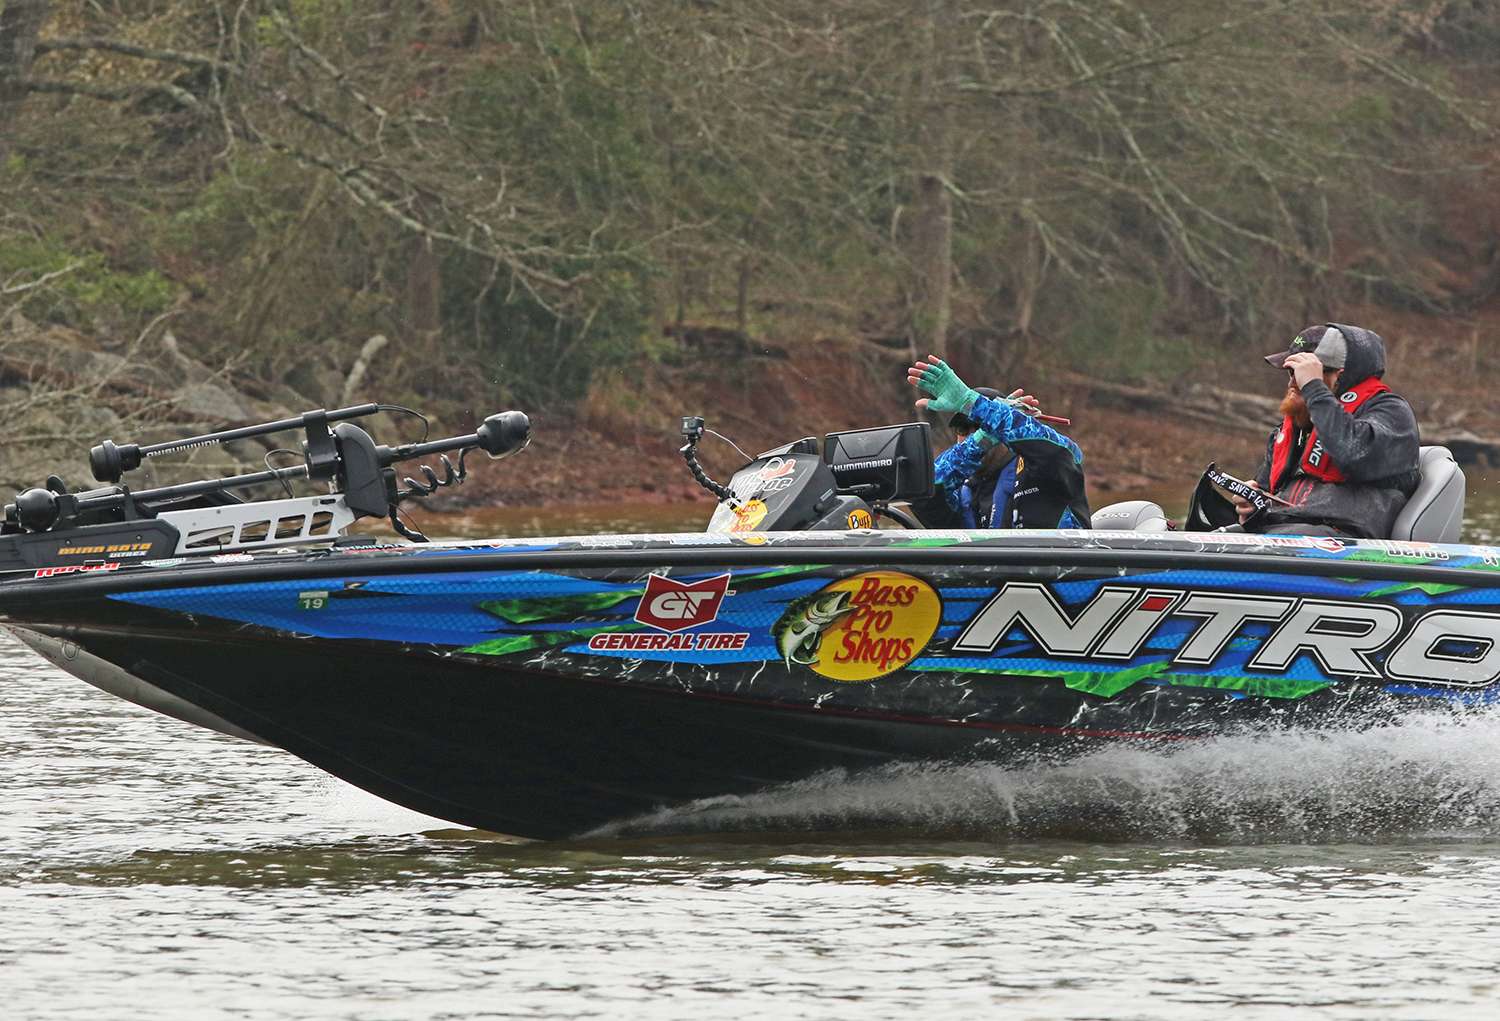 Follow along with Ott DeFoe, Jacob Wheeler and Dustin Connell as they take on Day 2 on Lake Hartwell.